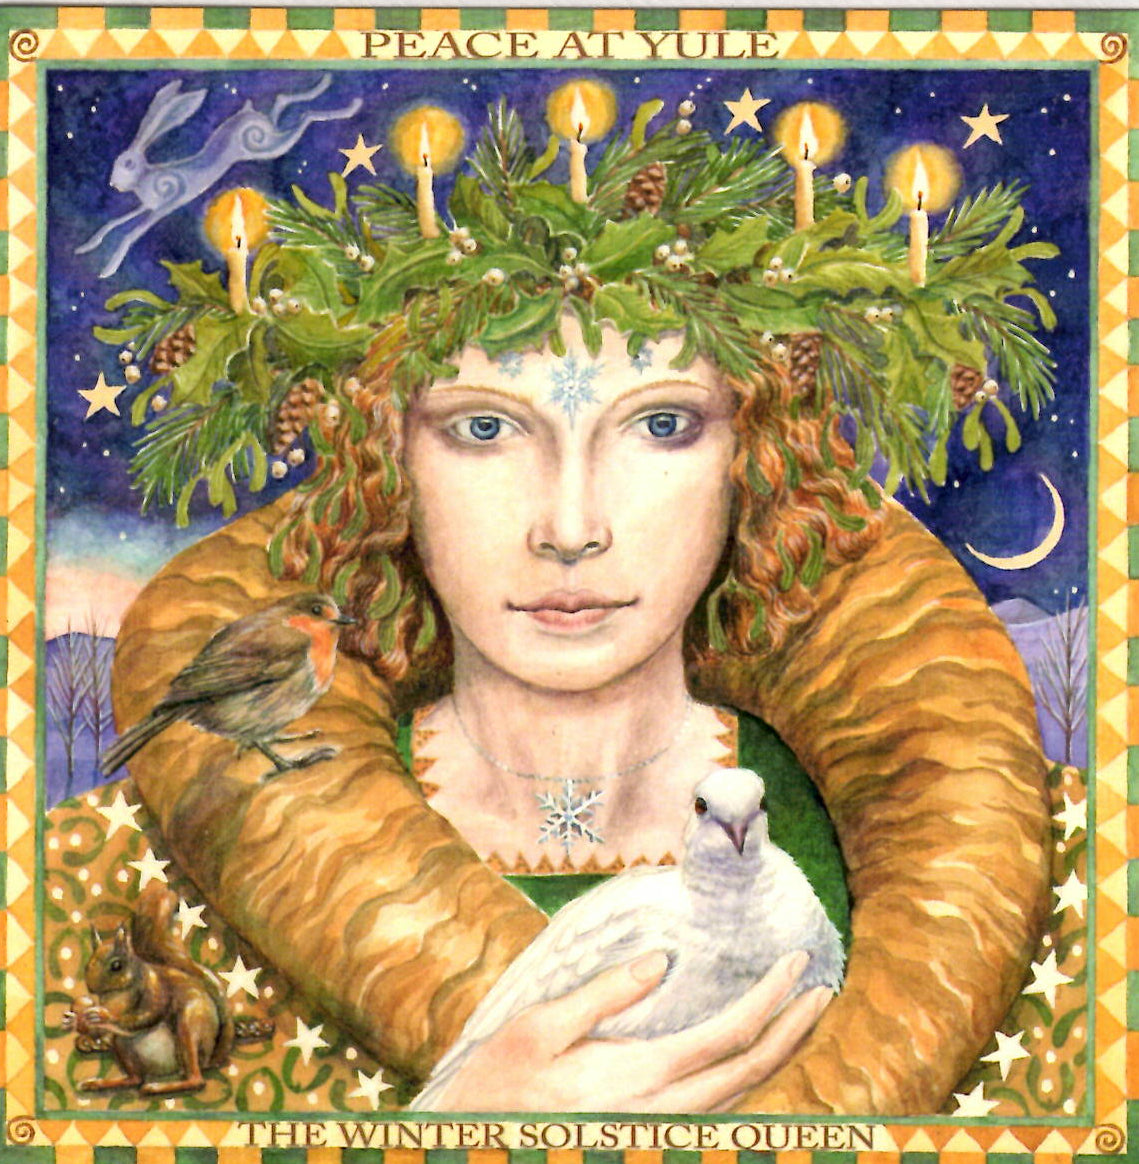 YULE XMAS GREETING CARD Winter Solstice Queen WENDY ANDREW